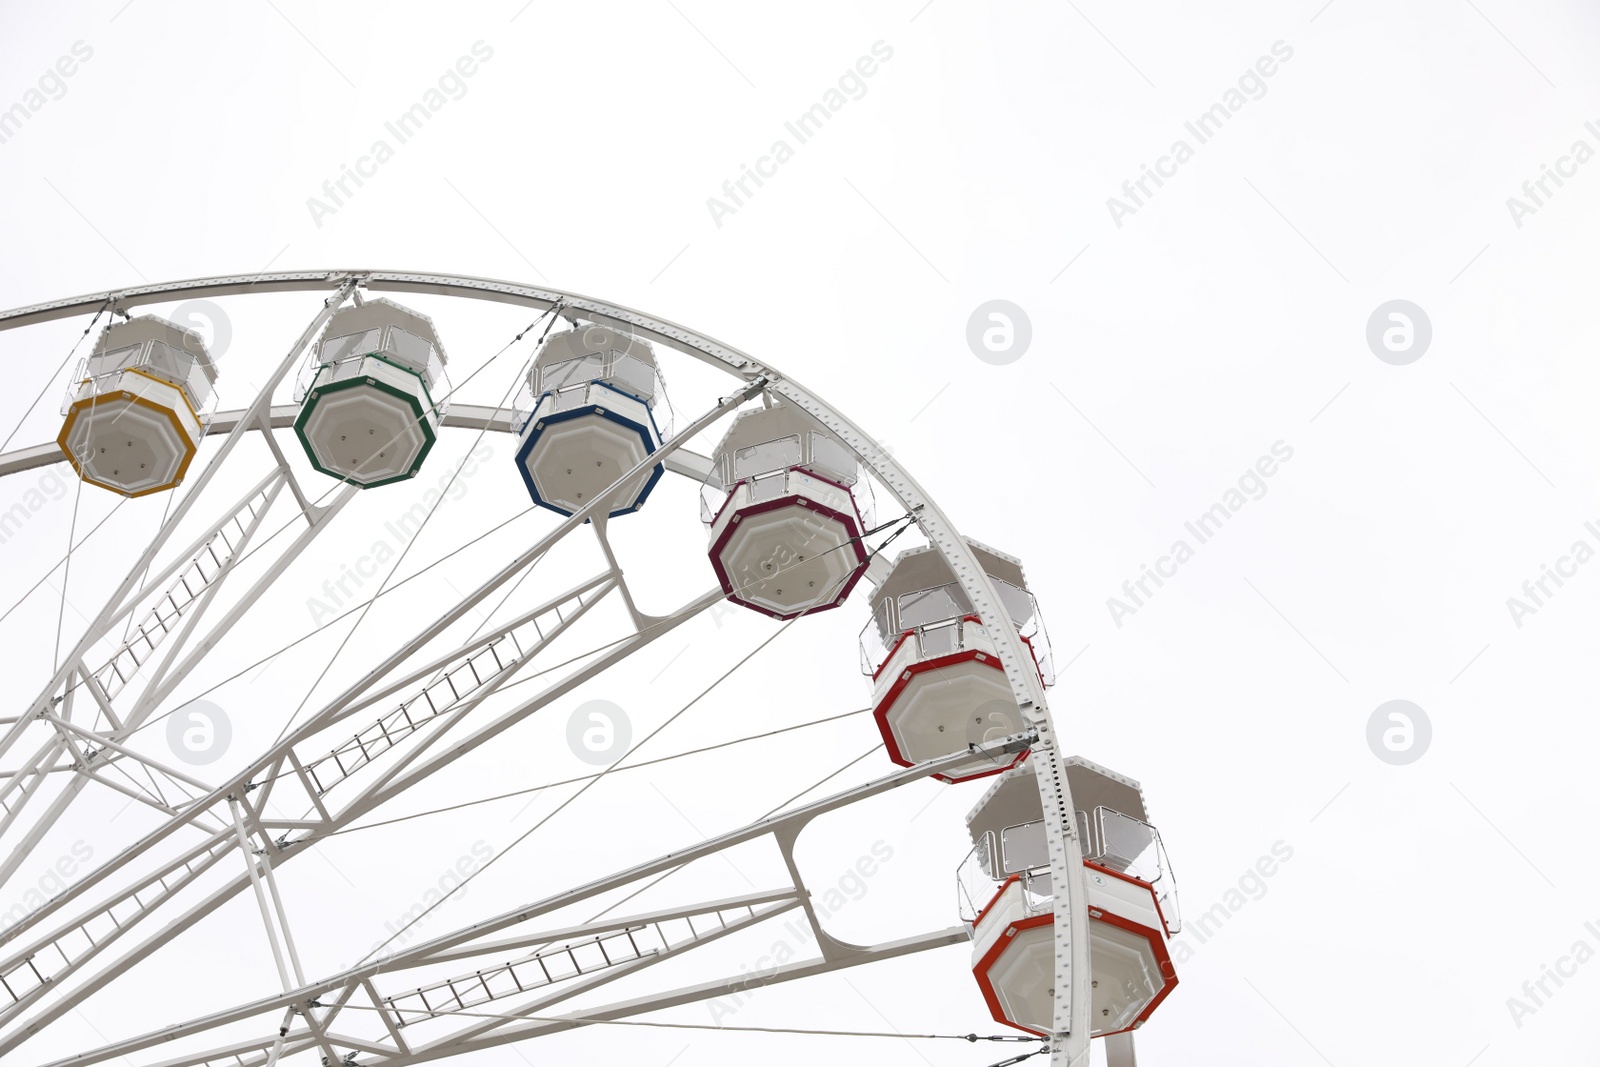 Photo of Large white observation wheel against sky, low angle view. Space for text